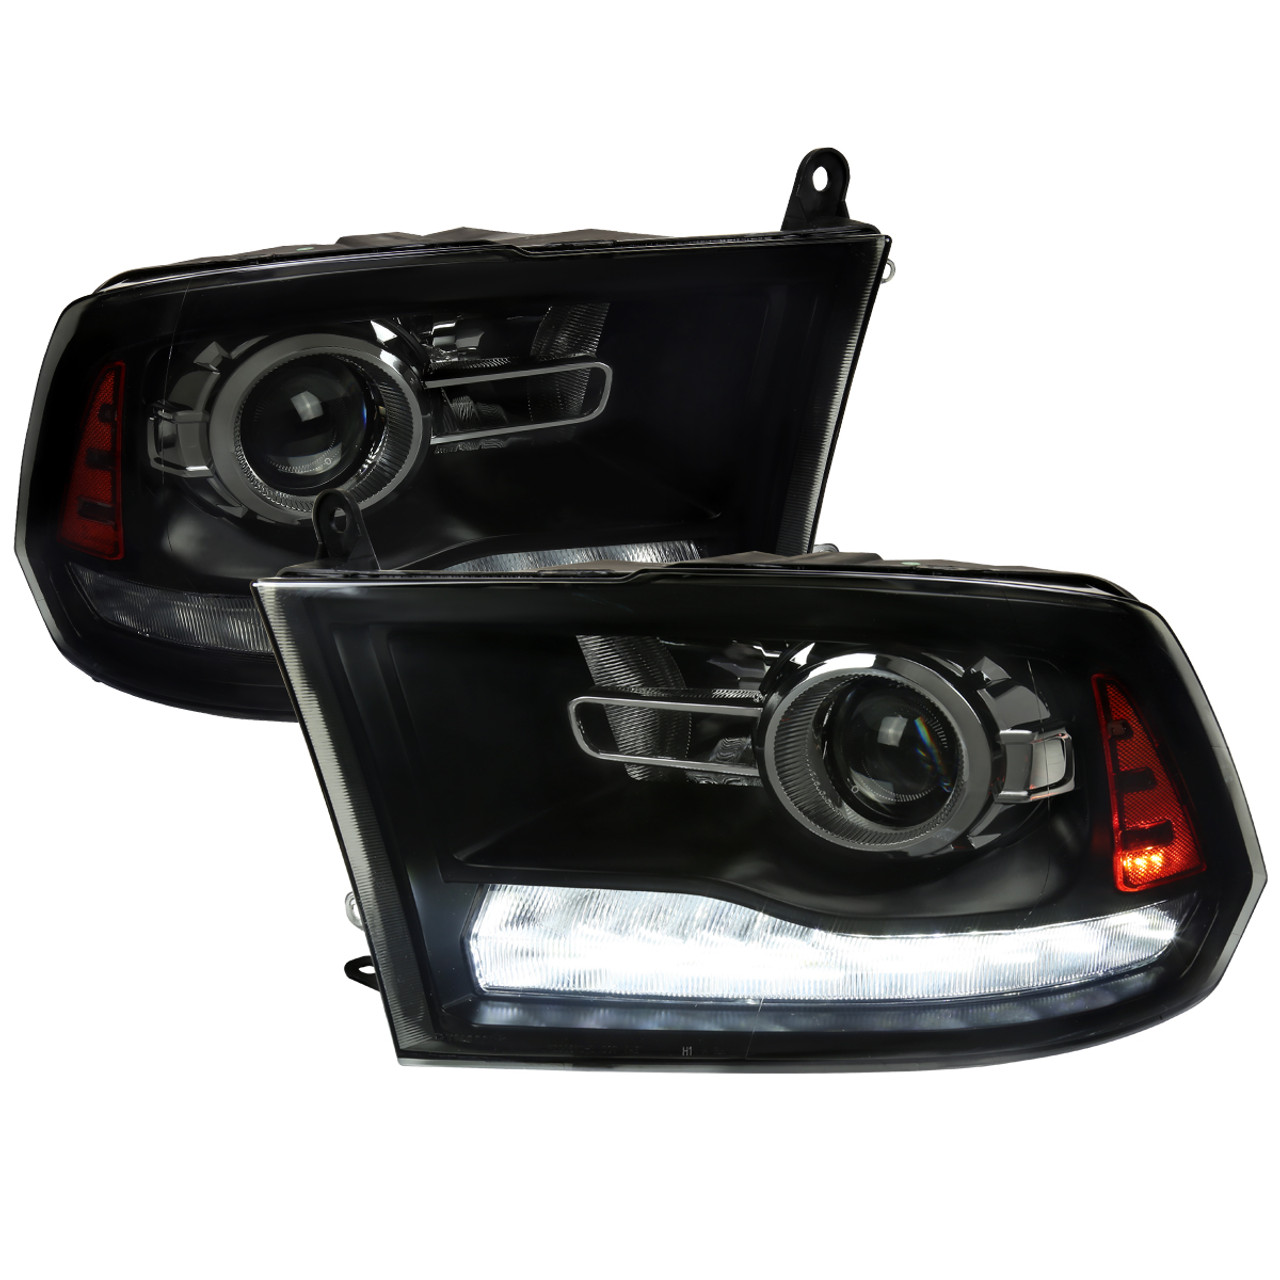  Spec-D Tuning Black Housing Smoke Lens Projector Headlights  Switchback LED Signal Compatible with 2009-2019 Dodge Ram 1500, 2010-2019  Dodge Ram 2500/3500 Left + Right Pair Headlamps Assembly : Automotive